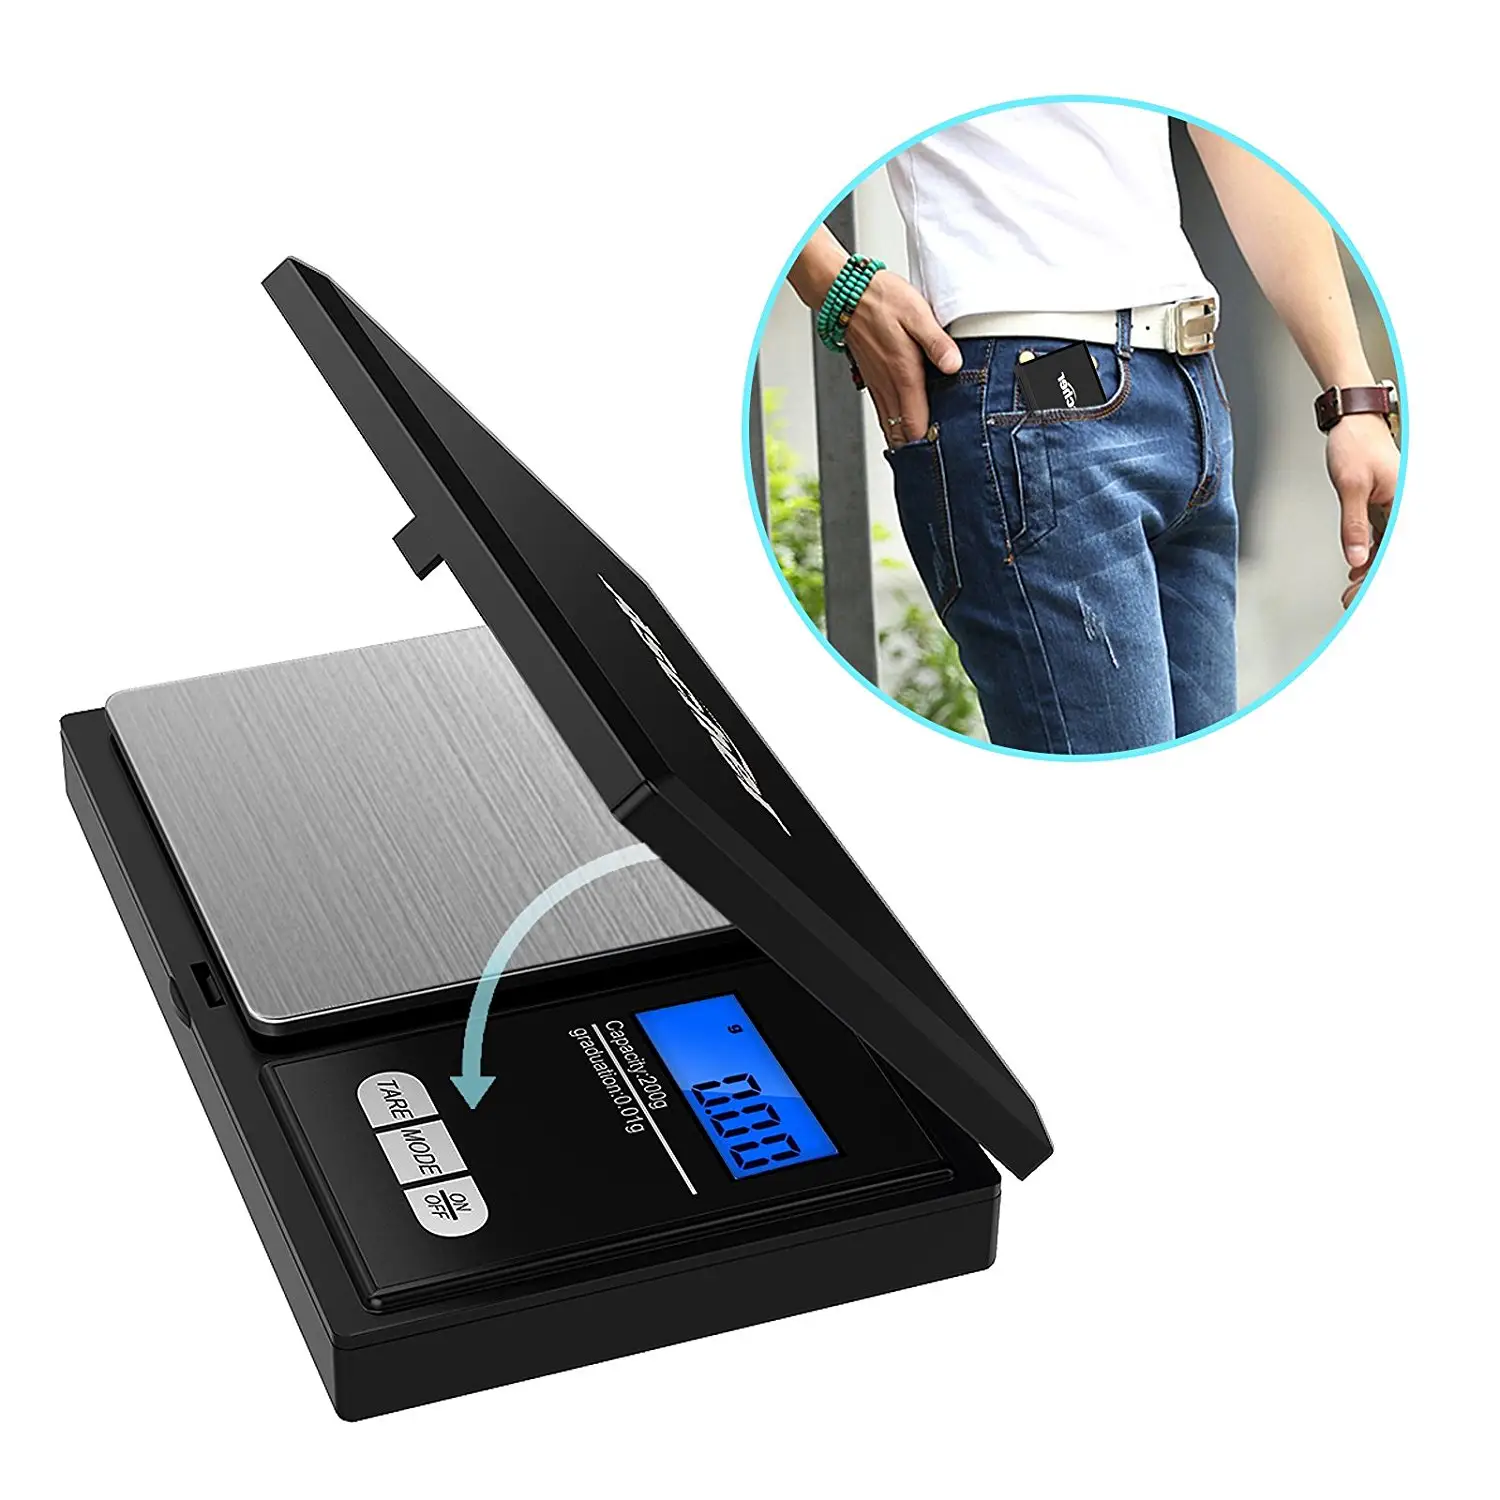 Hot Selling Digital Pocket Scale With AAA battery Mini Digital Weighing Scale Electronic Balance Gram Digital Pocket Scale